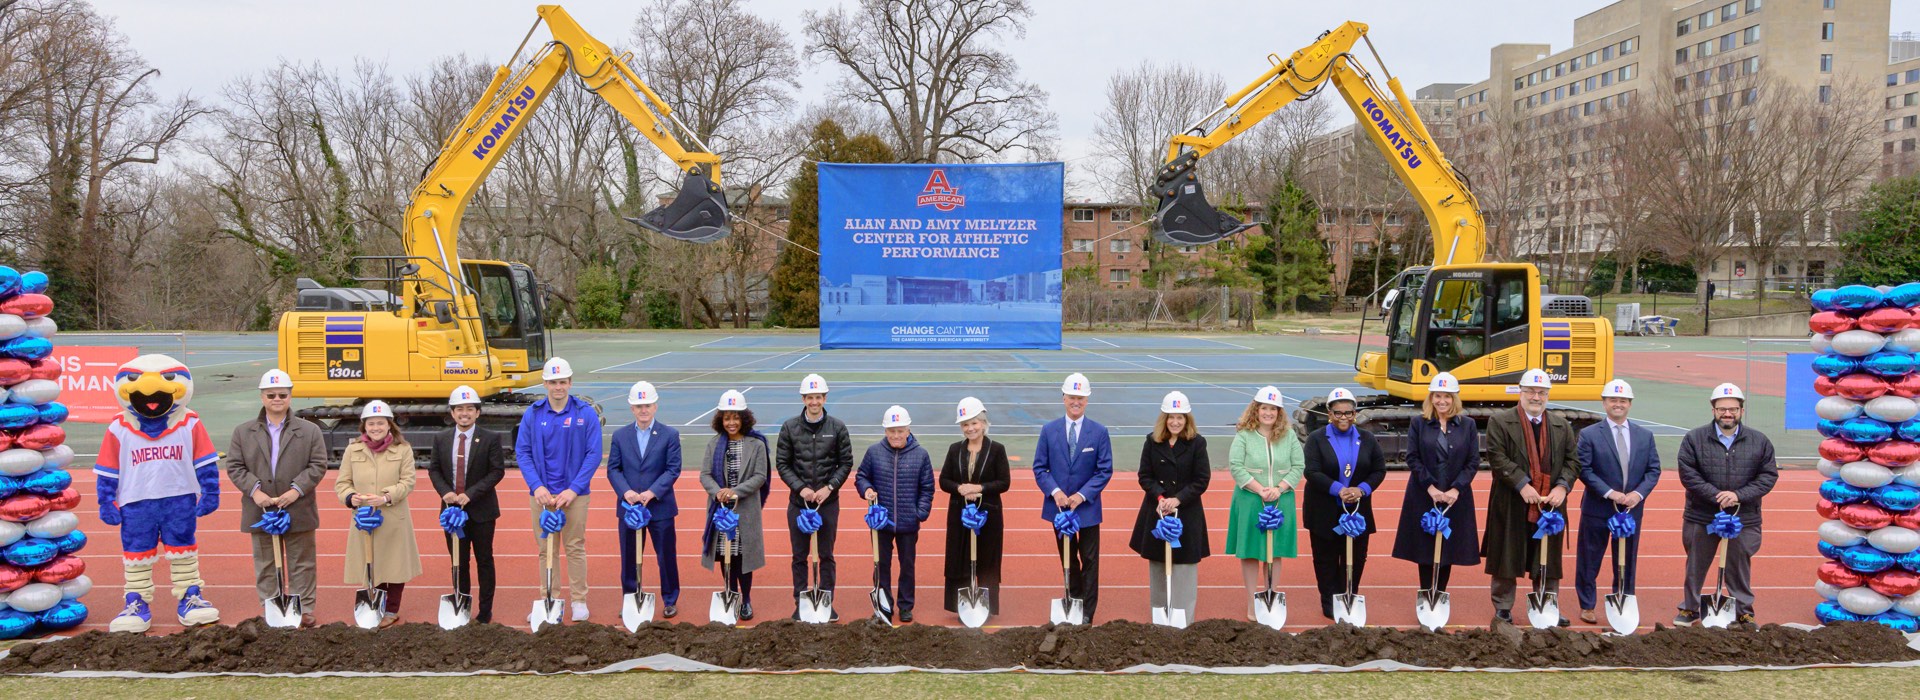 Donors and AU leadership gathered in Reeves Field with shovels for the ceremonial groundbreaking.